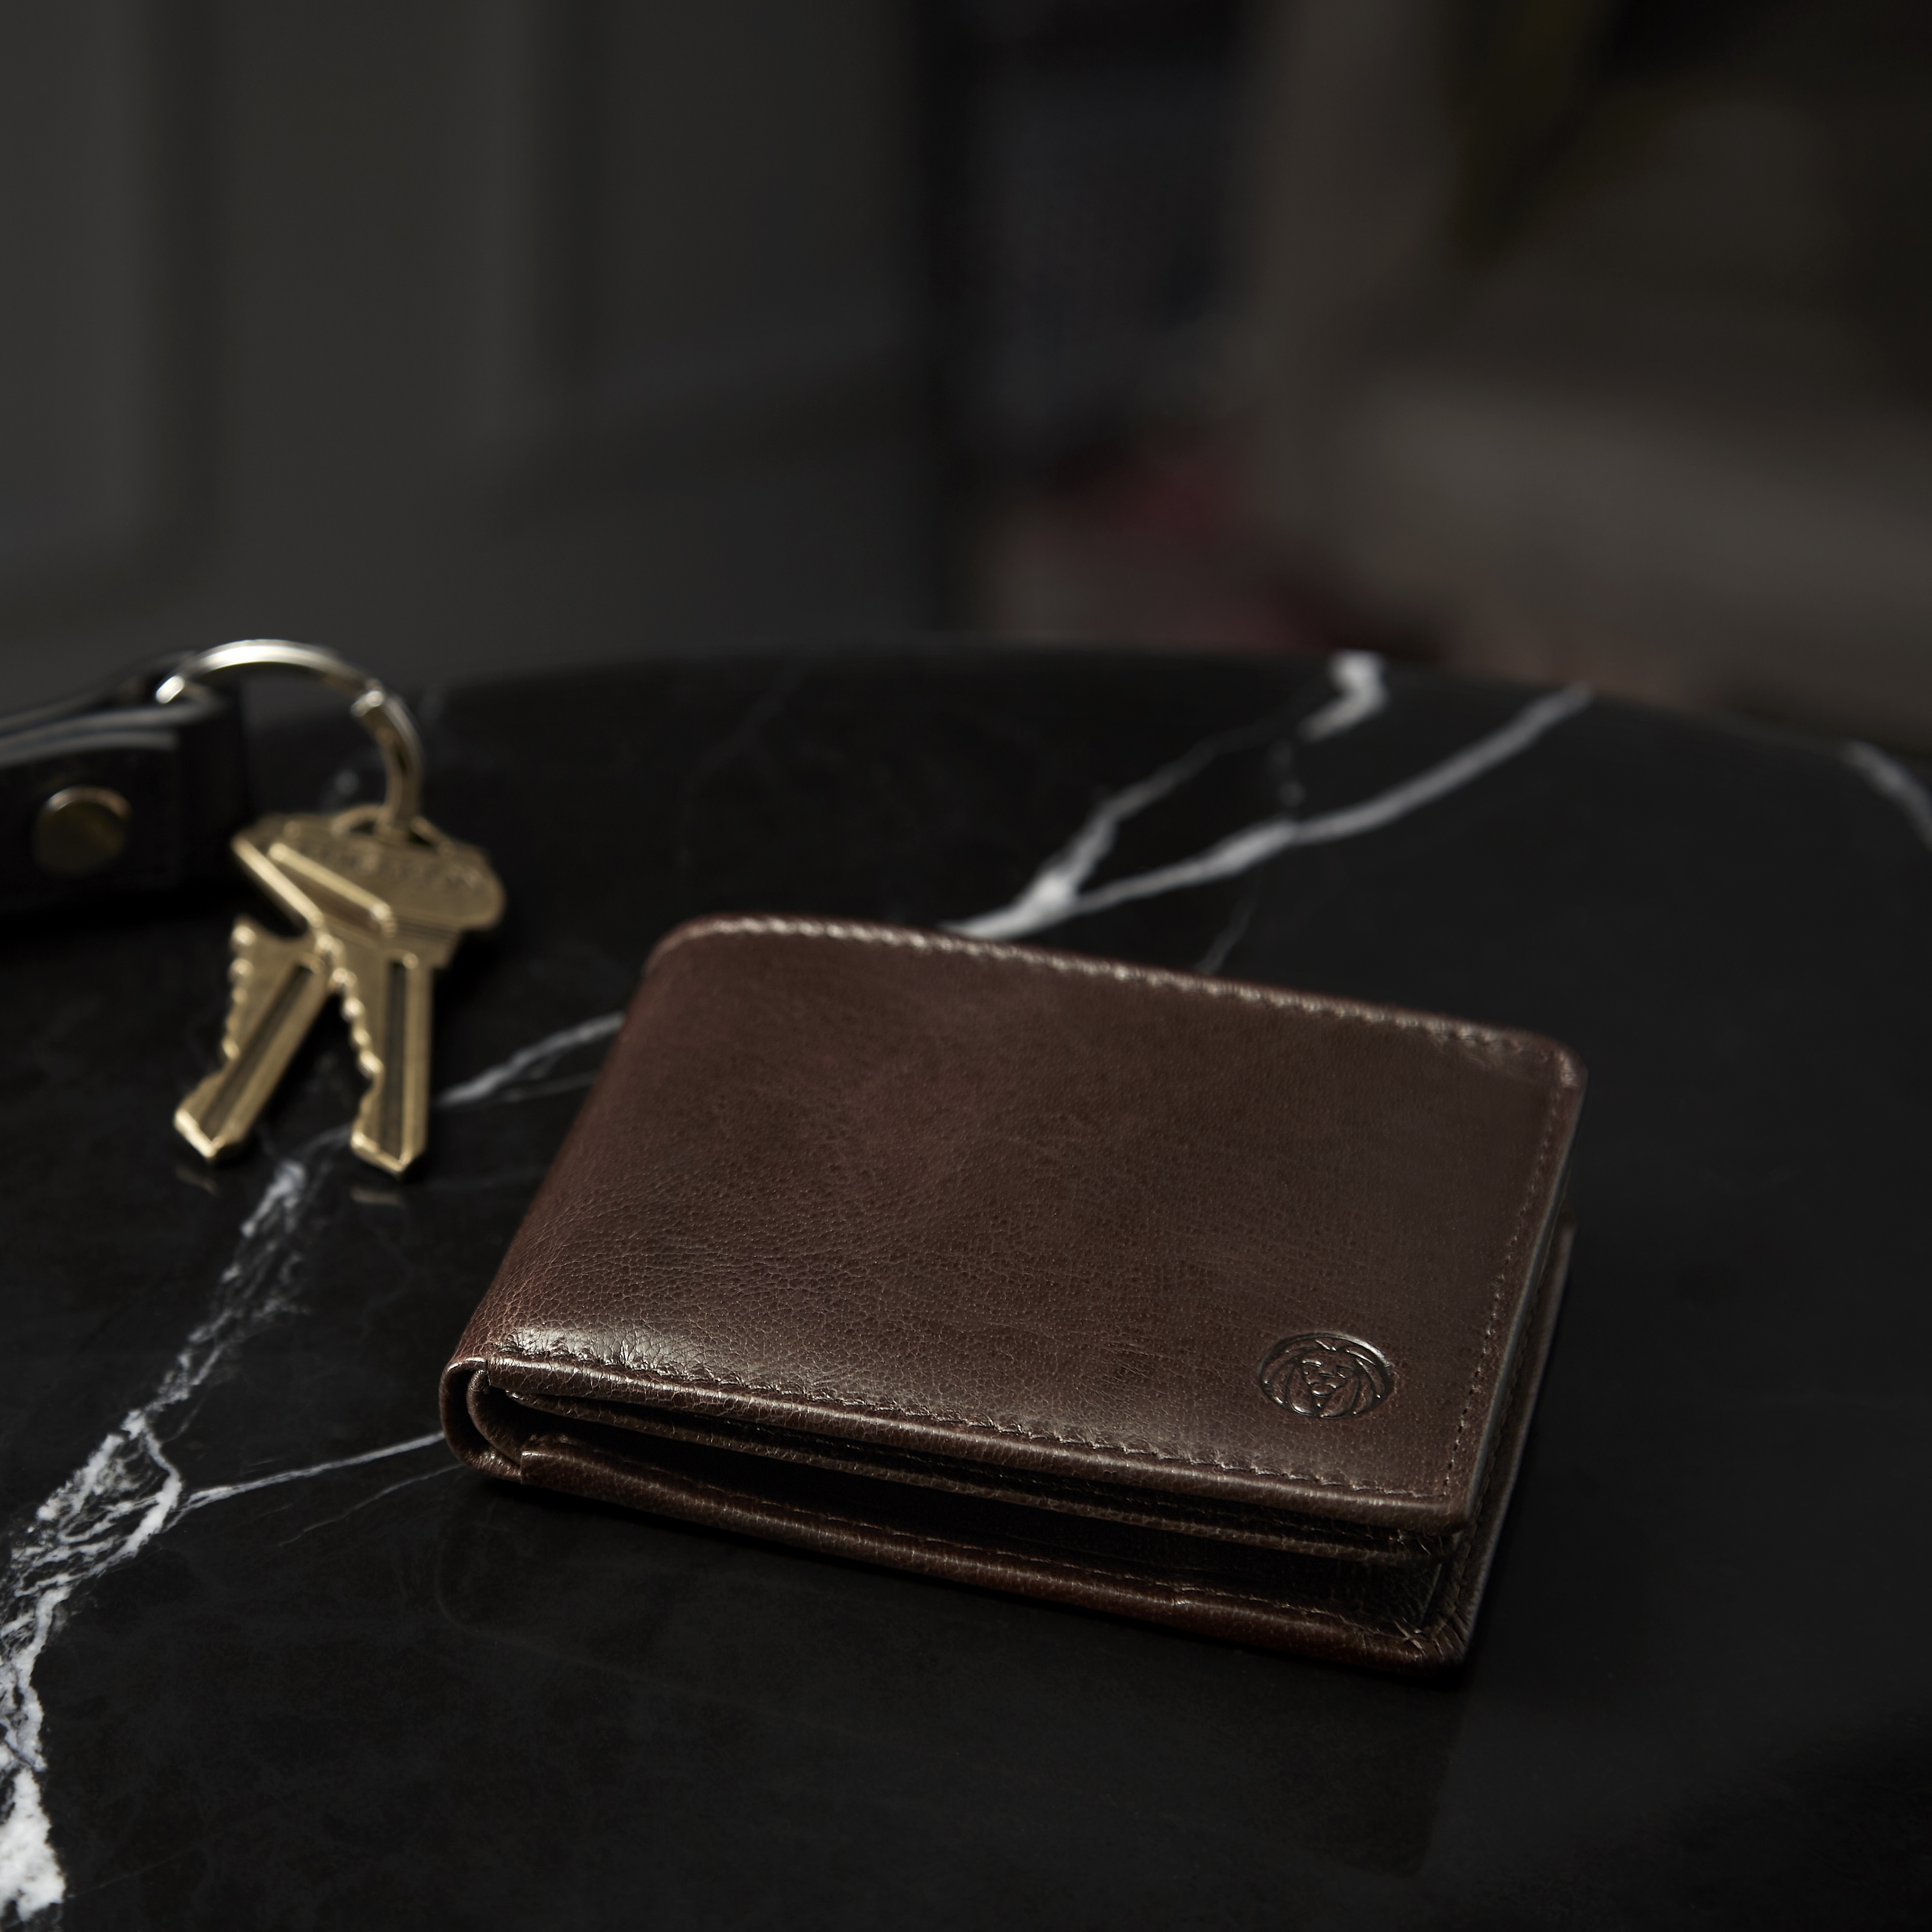 Leather Wallets for Men: 4 Special Features You Should Look For